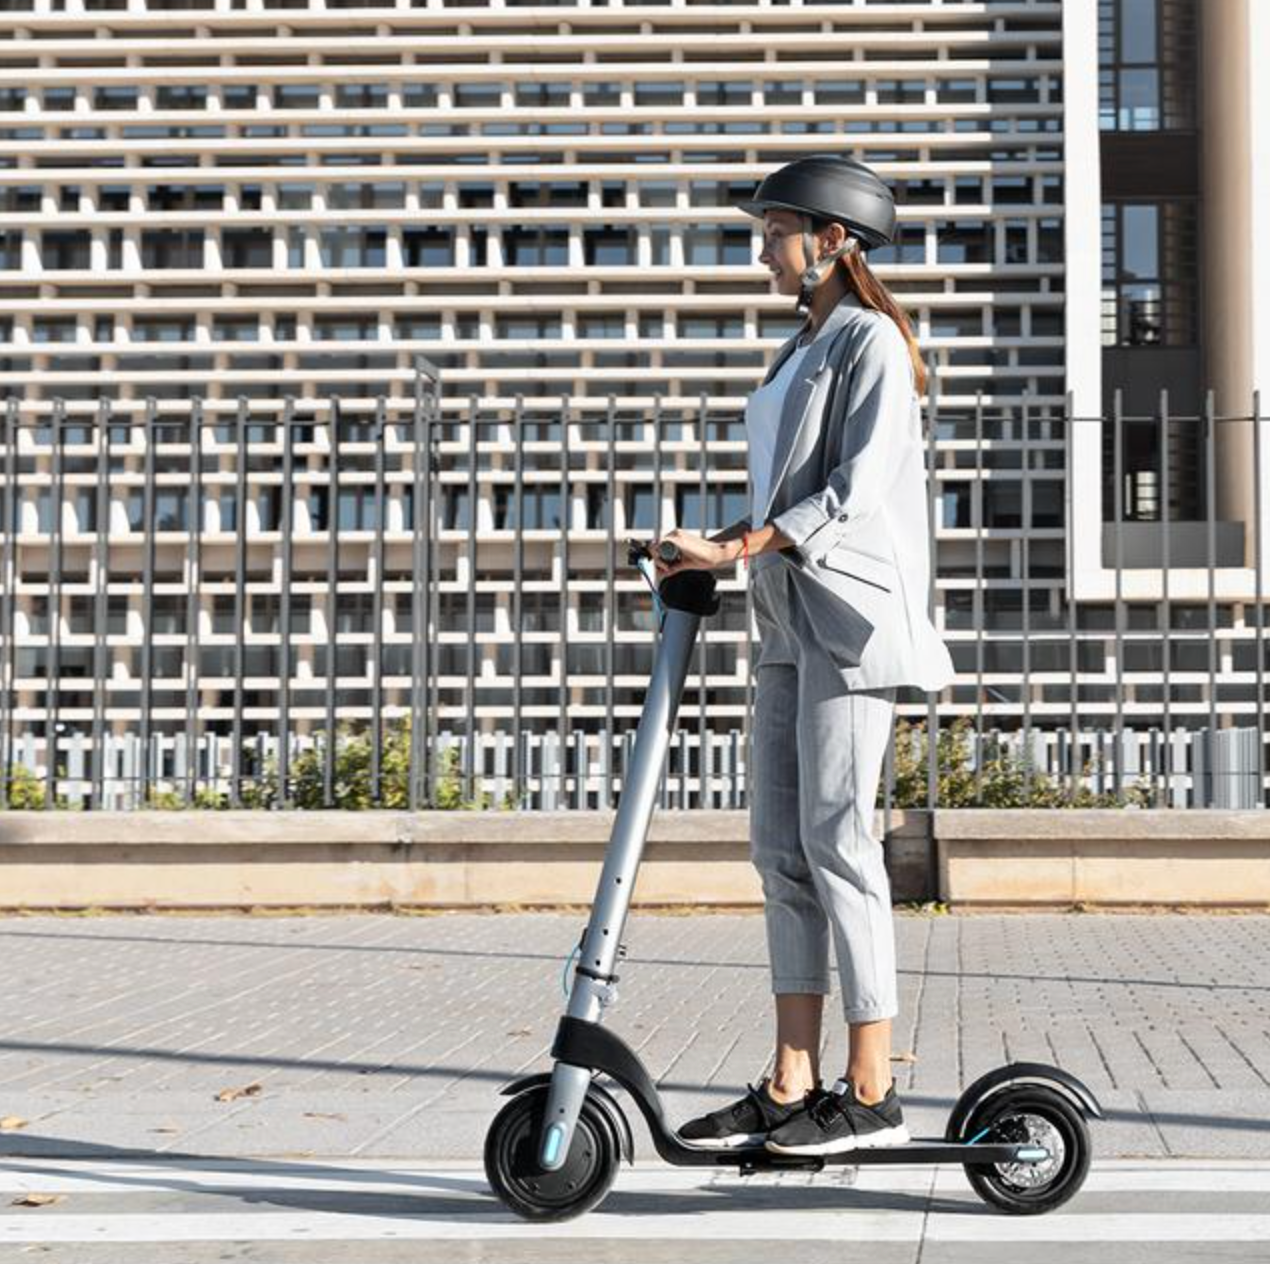 Cecotec Bongo Series A Connected Electric Scooter